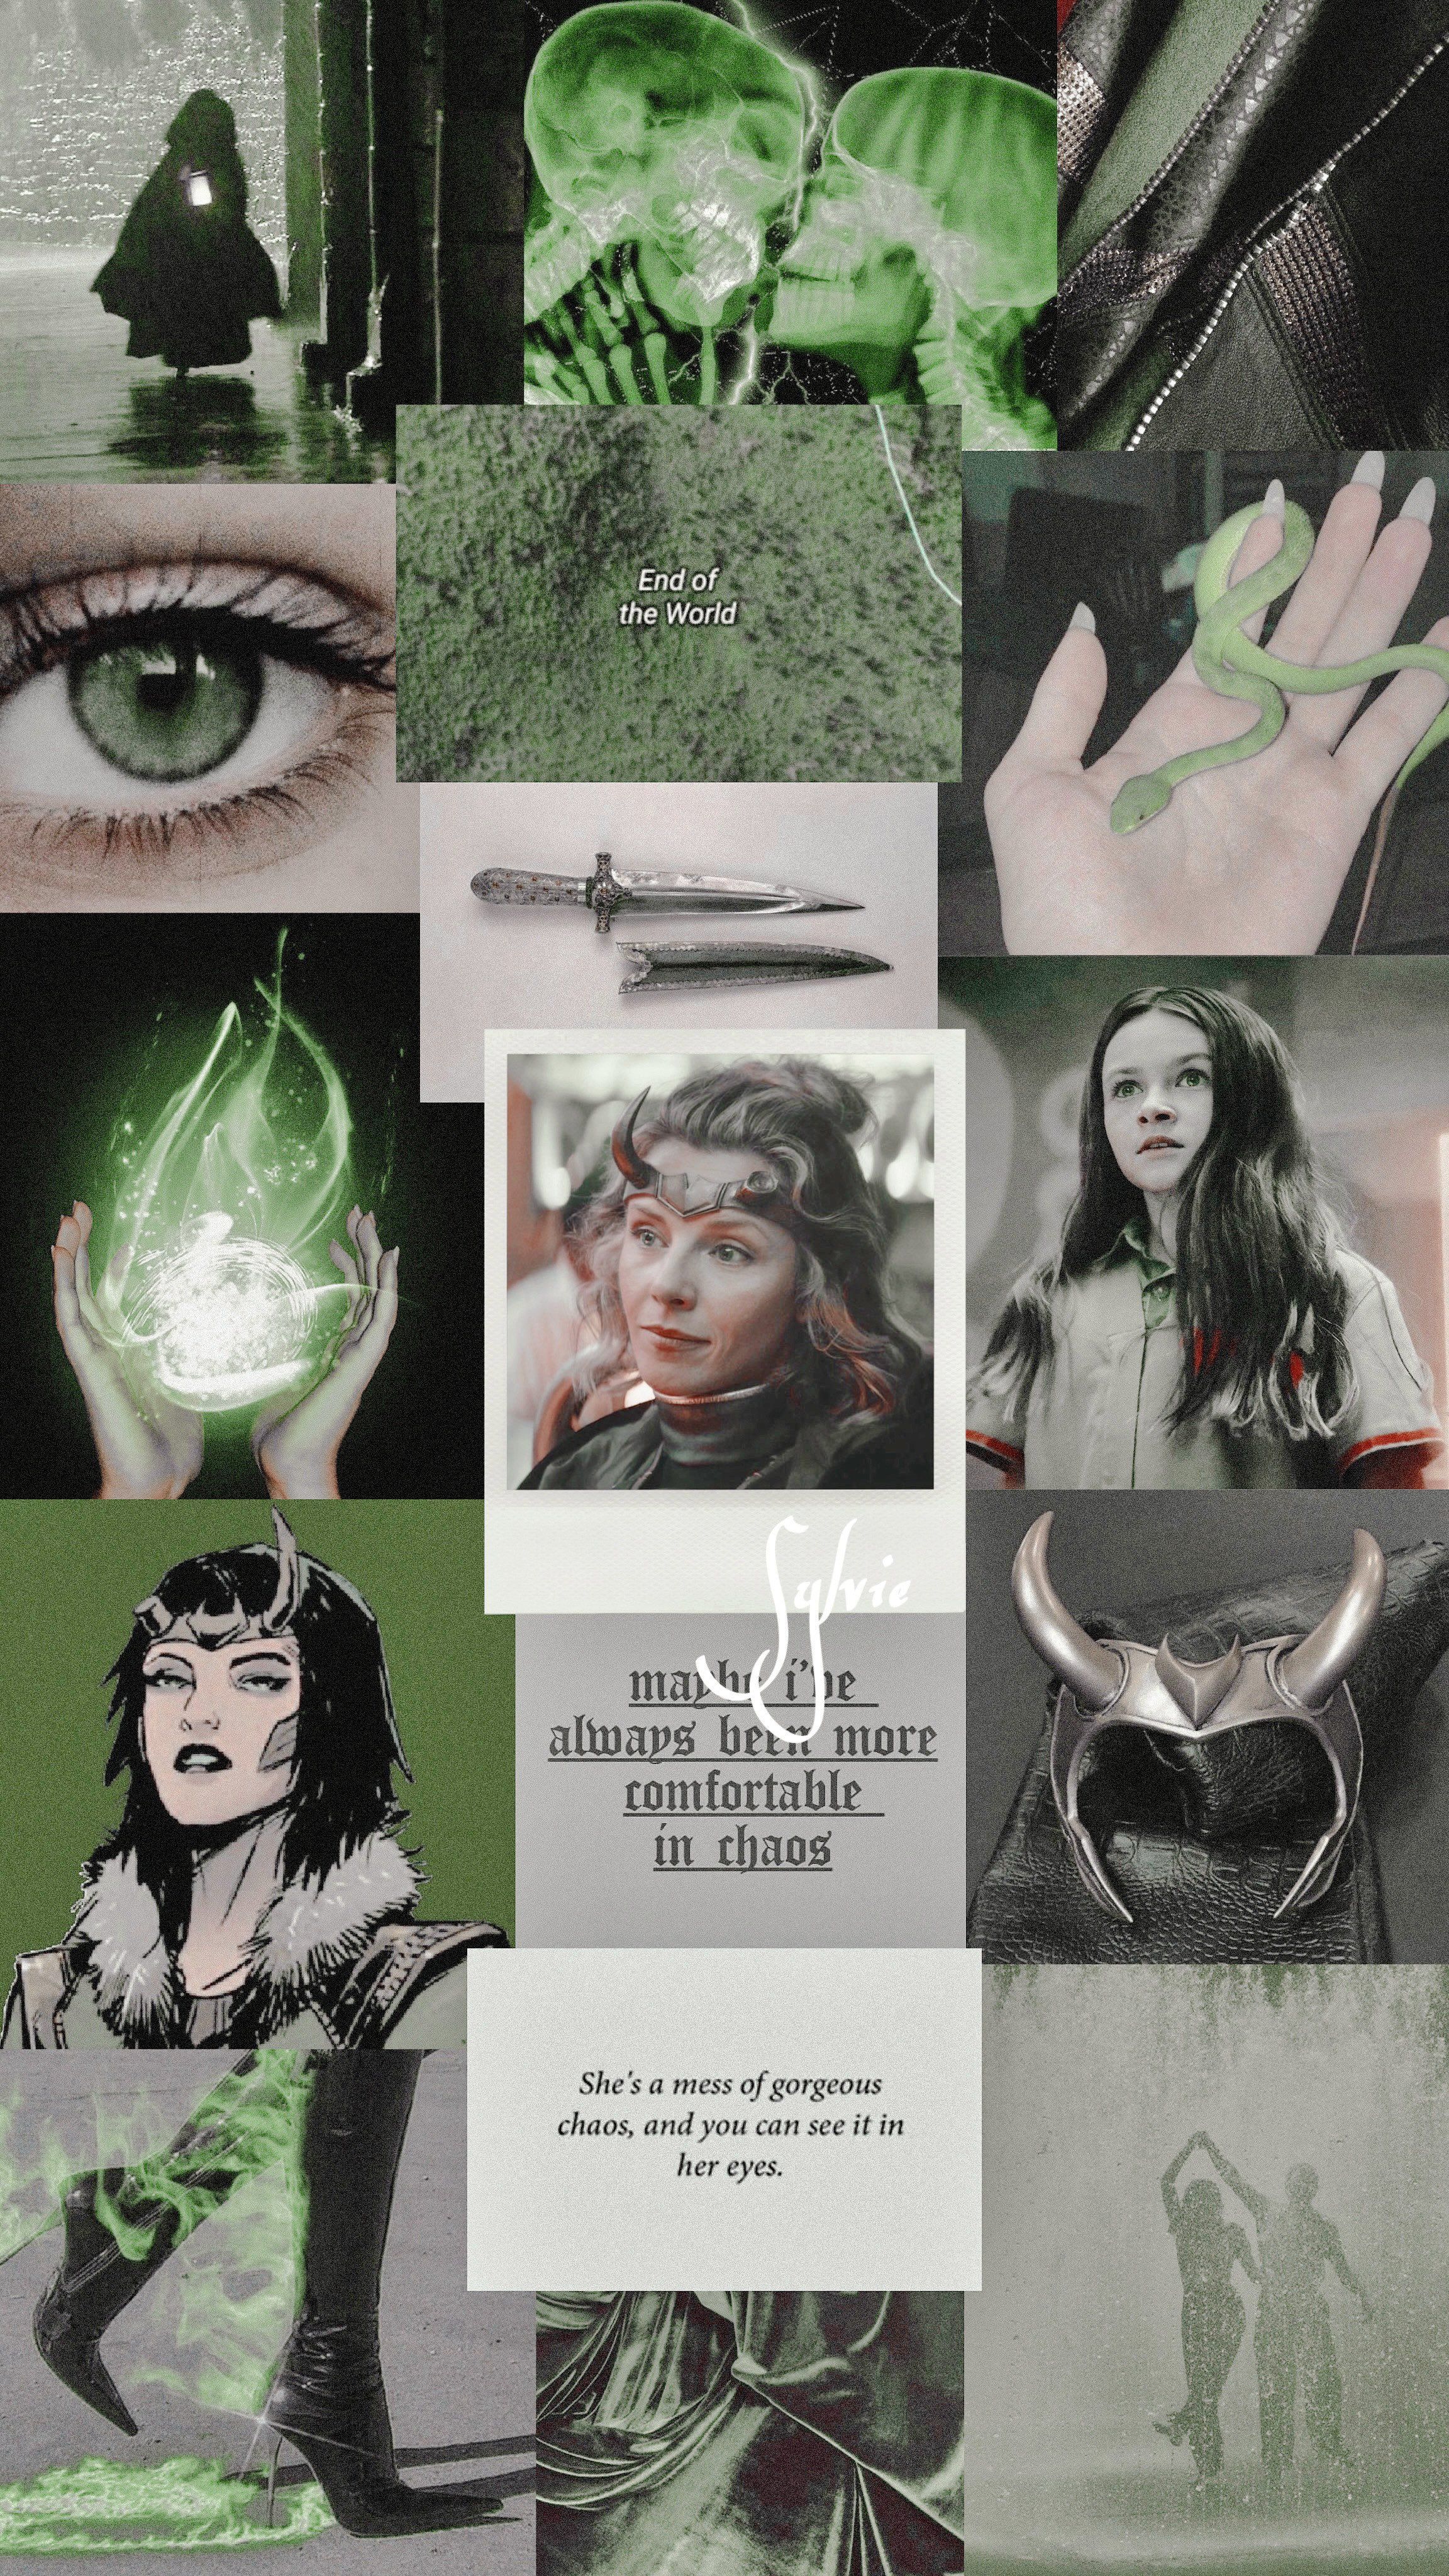 Collage of images of the character from the Marvel Cinematic Universe, including a picture of her with a green gem in her hand, a picture of her with a knife, and a picture of her with green hair. - Loki